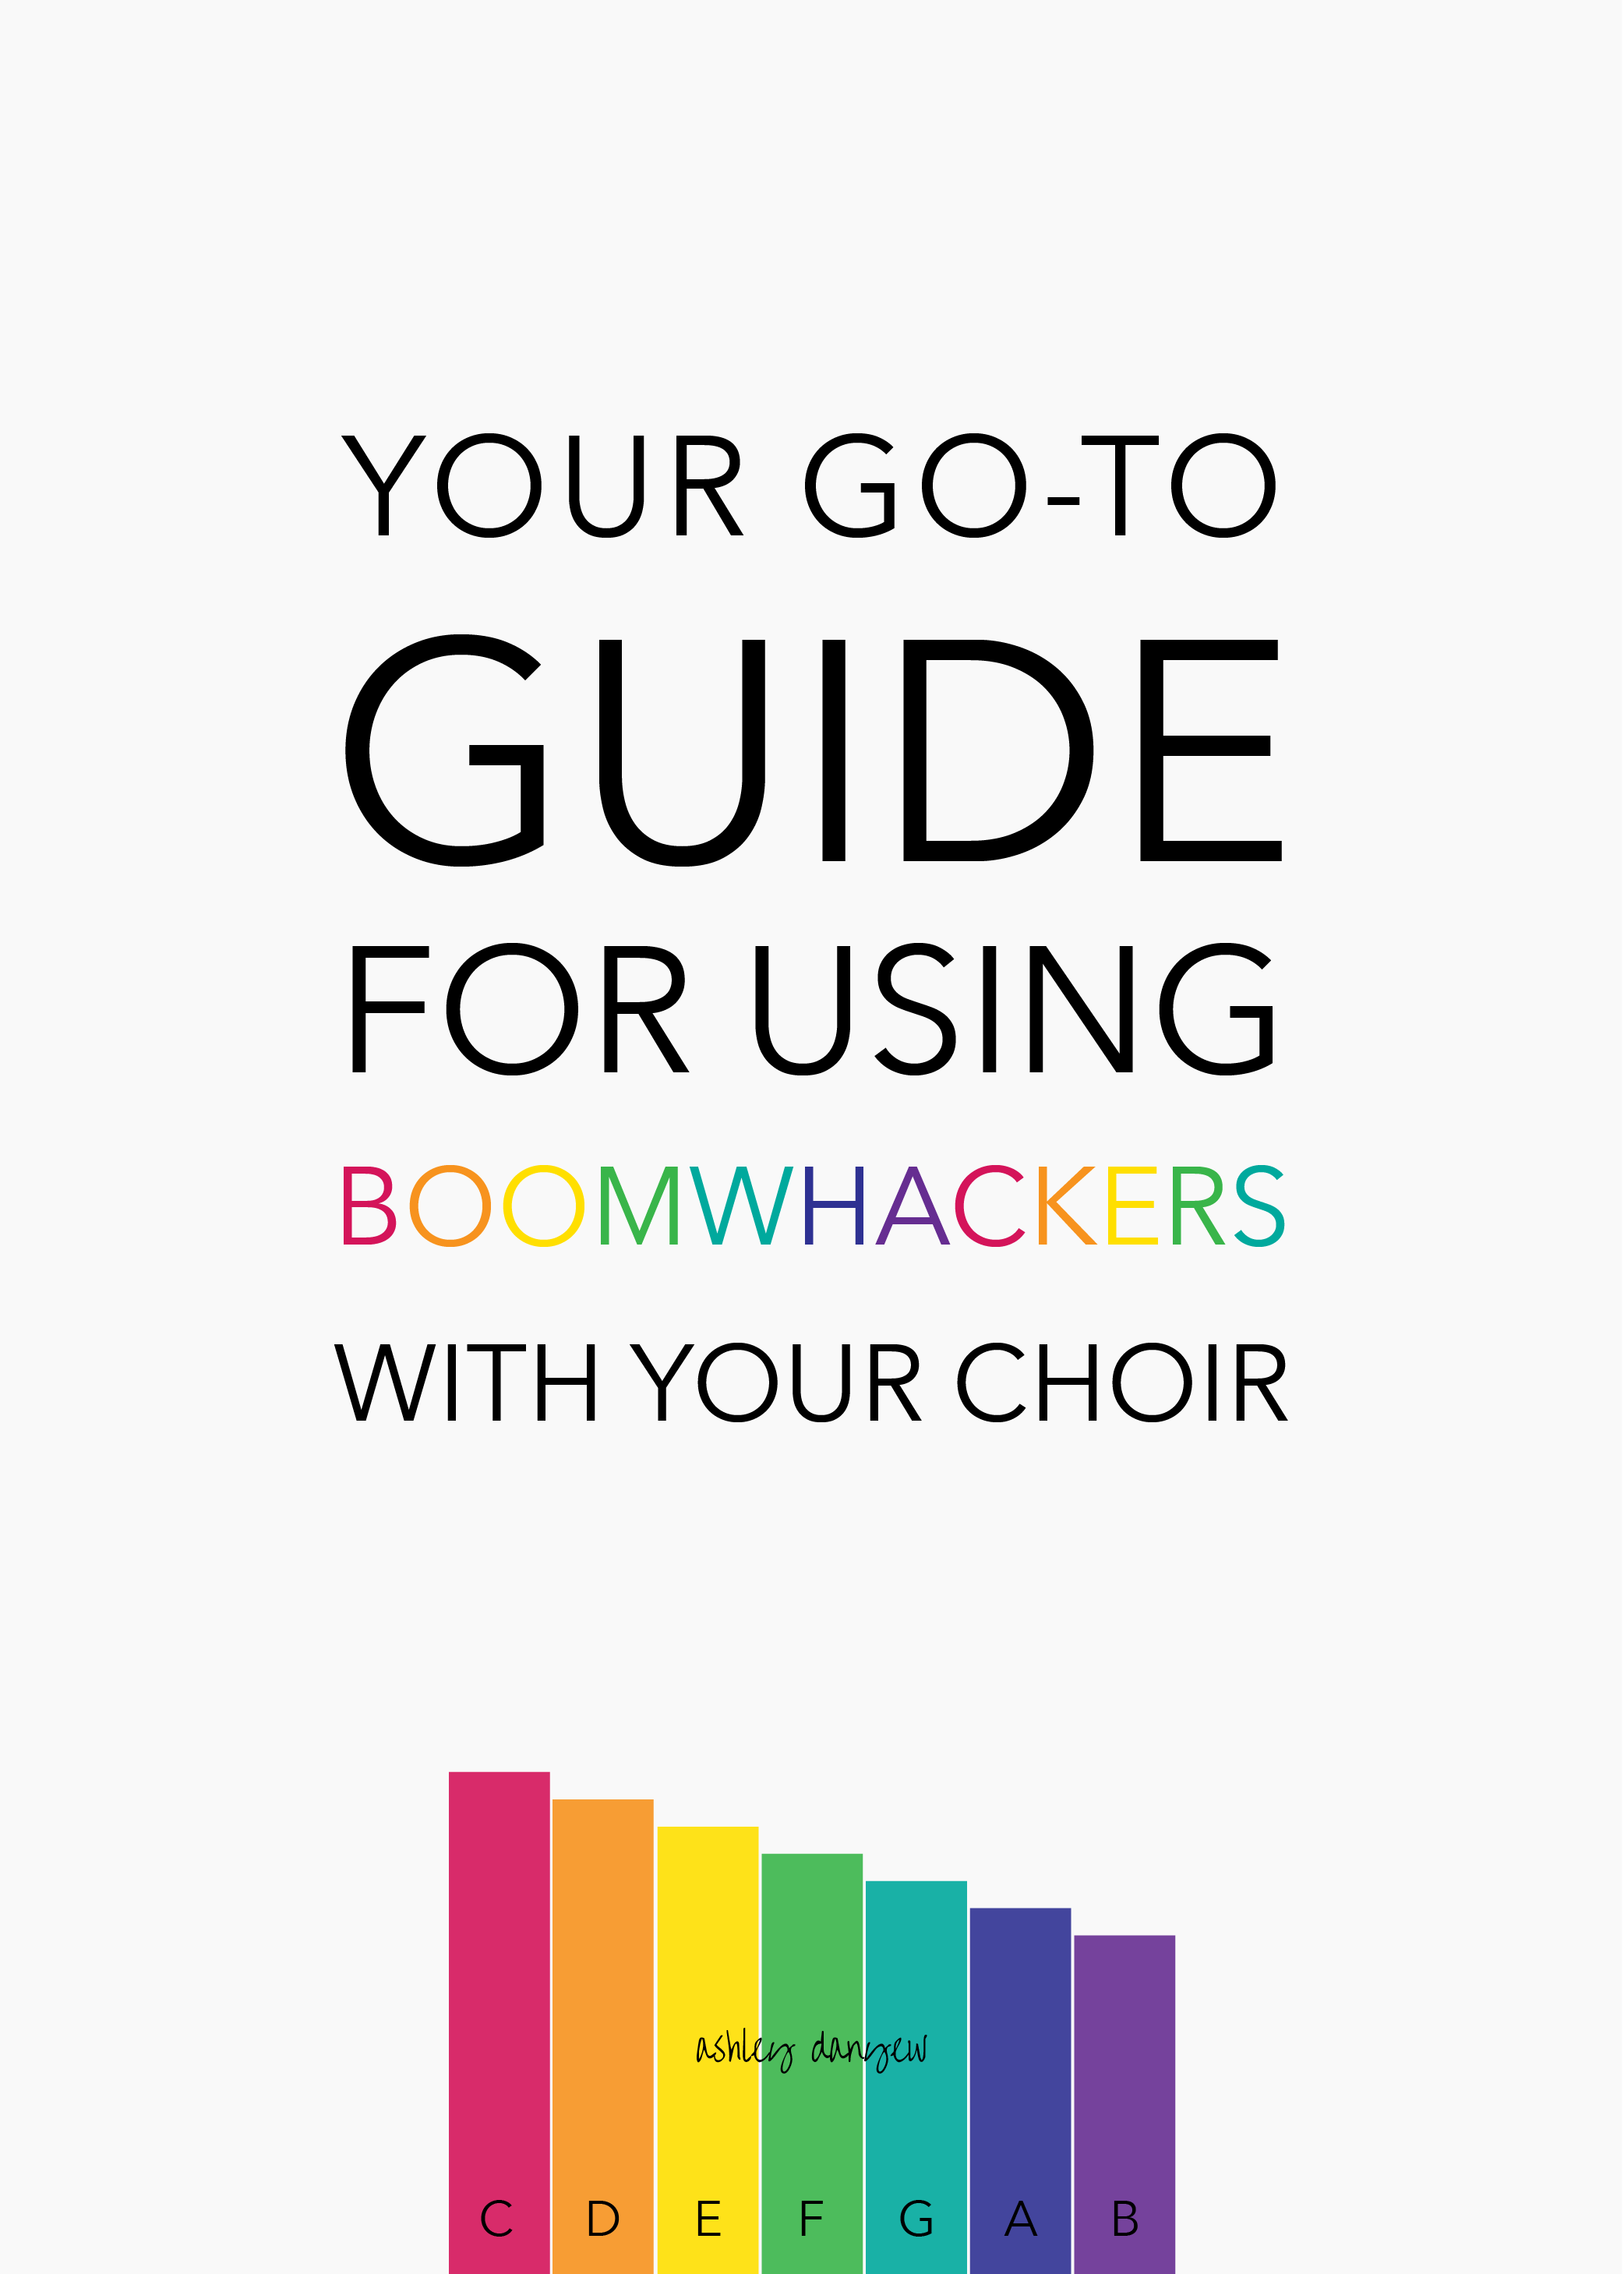 Copy of Your Go-To Guide for Using Boomwhackers with Your Choir